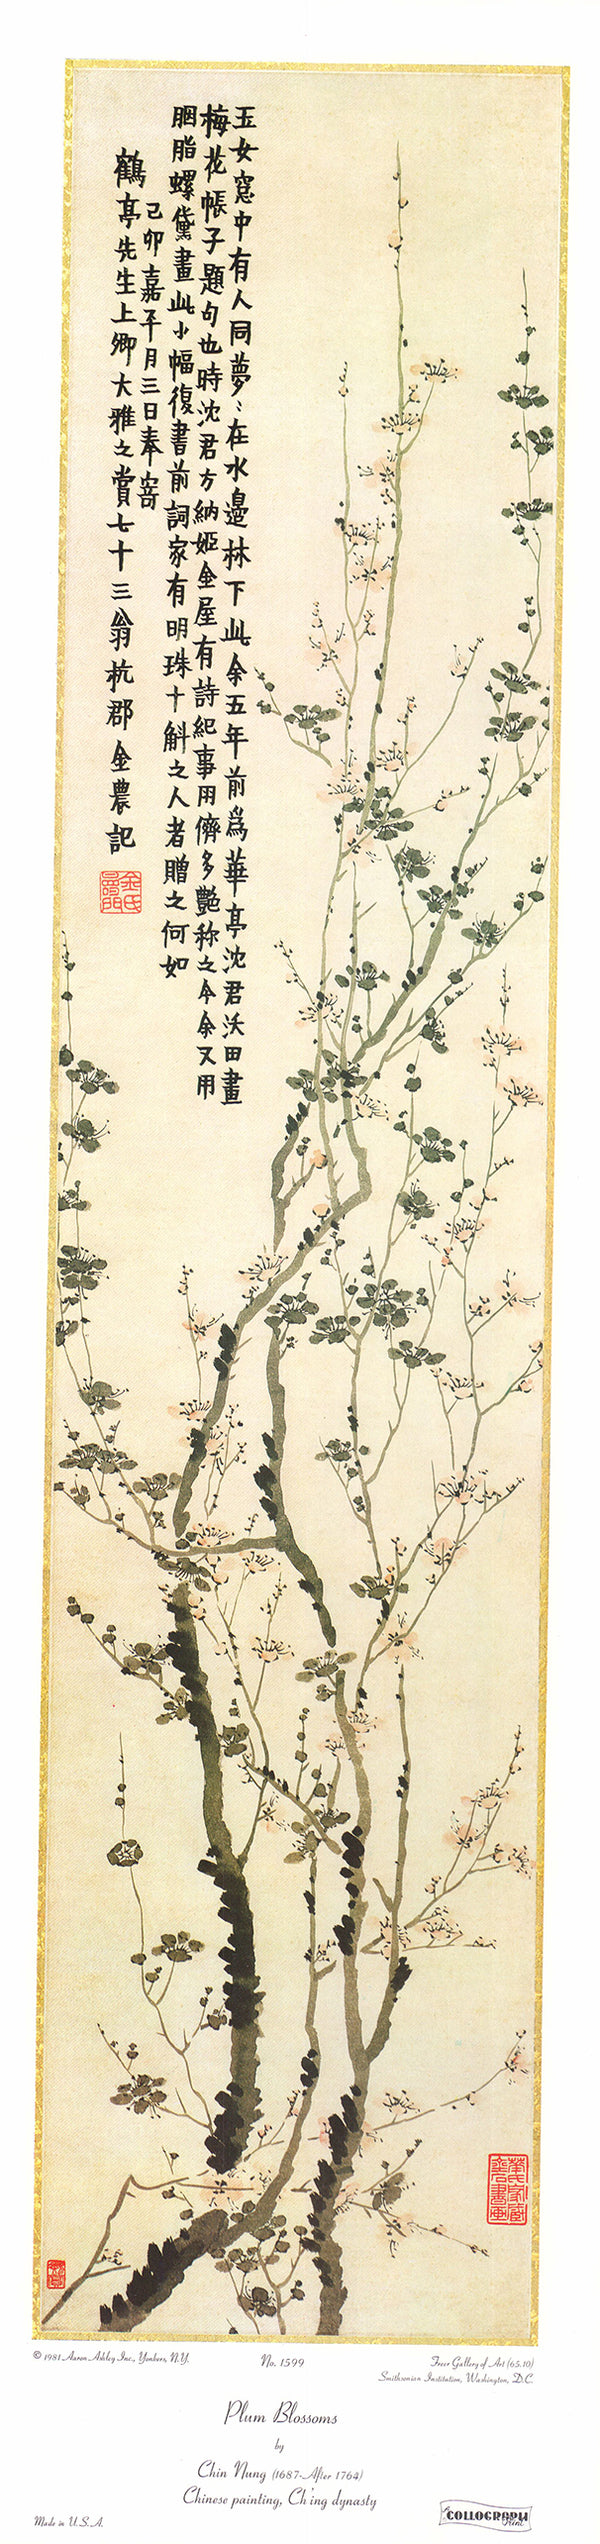 Plum Blossoms by Chin Nung - 9 X 36 Inches (Art Print)